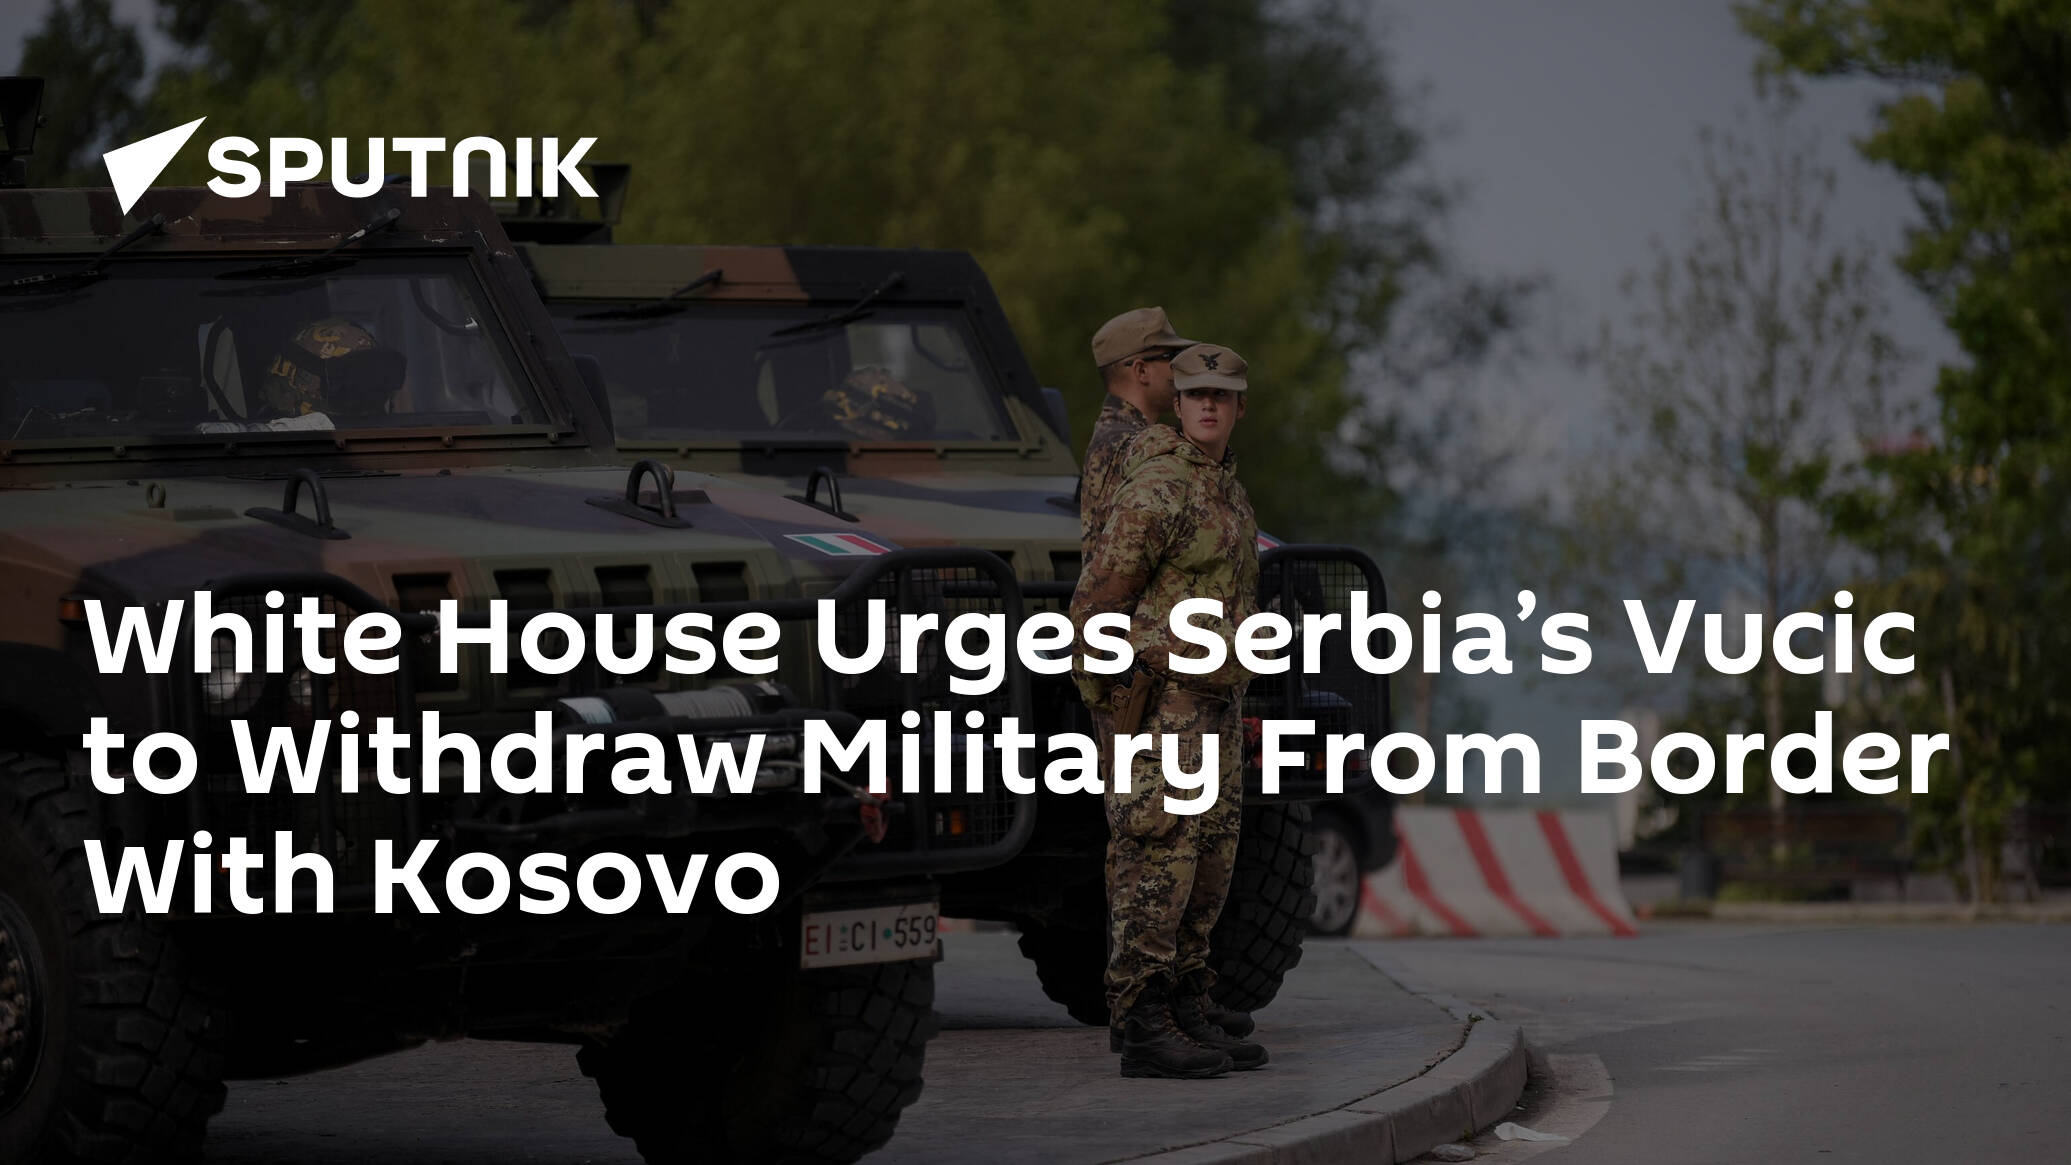 White House Urges Serbia’s Vucic to Withdraw Military From Border With Kosovo